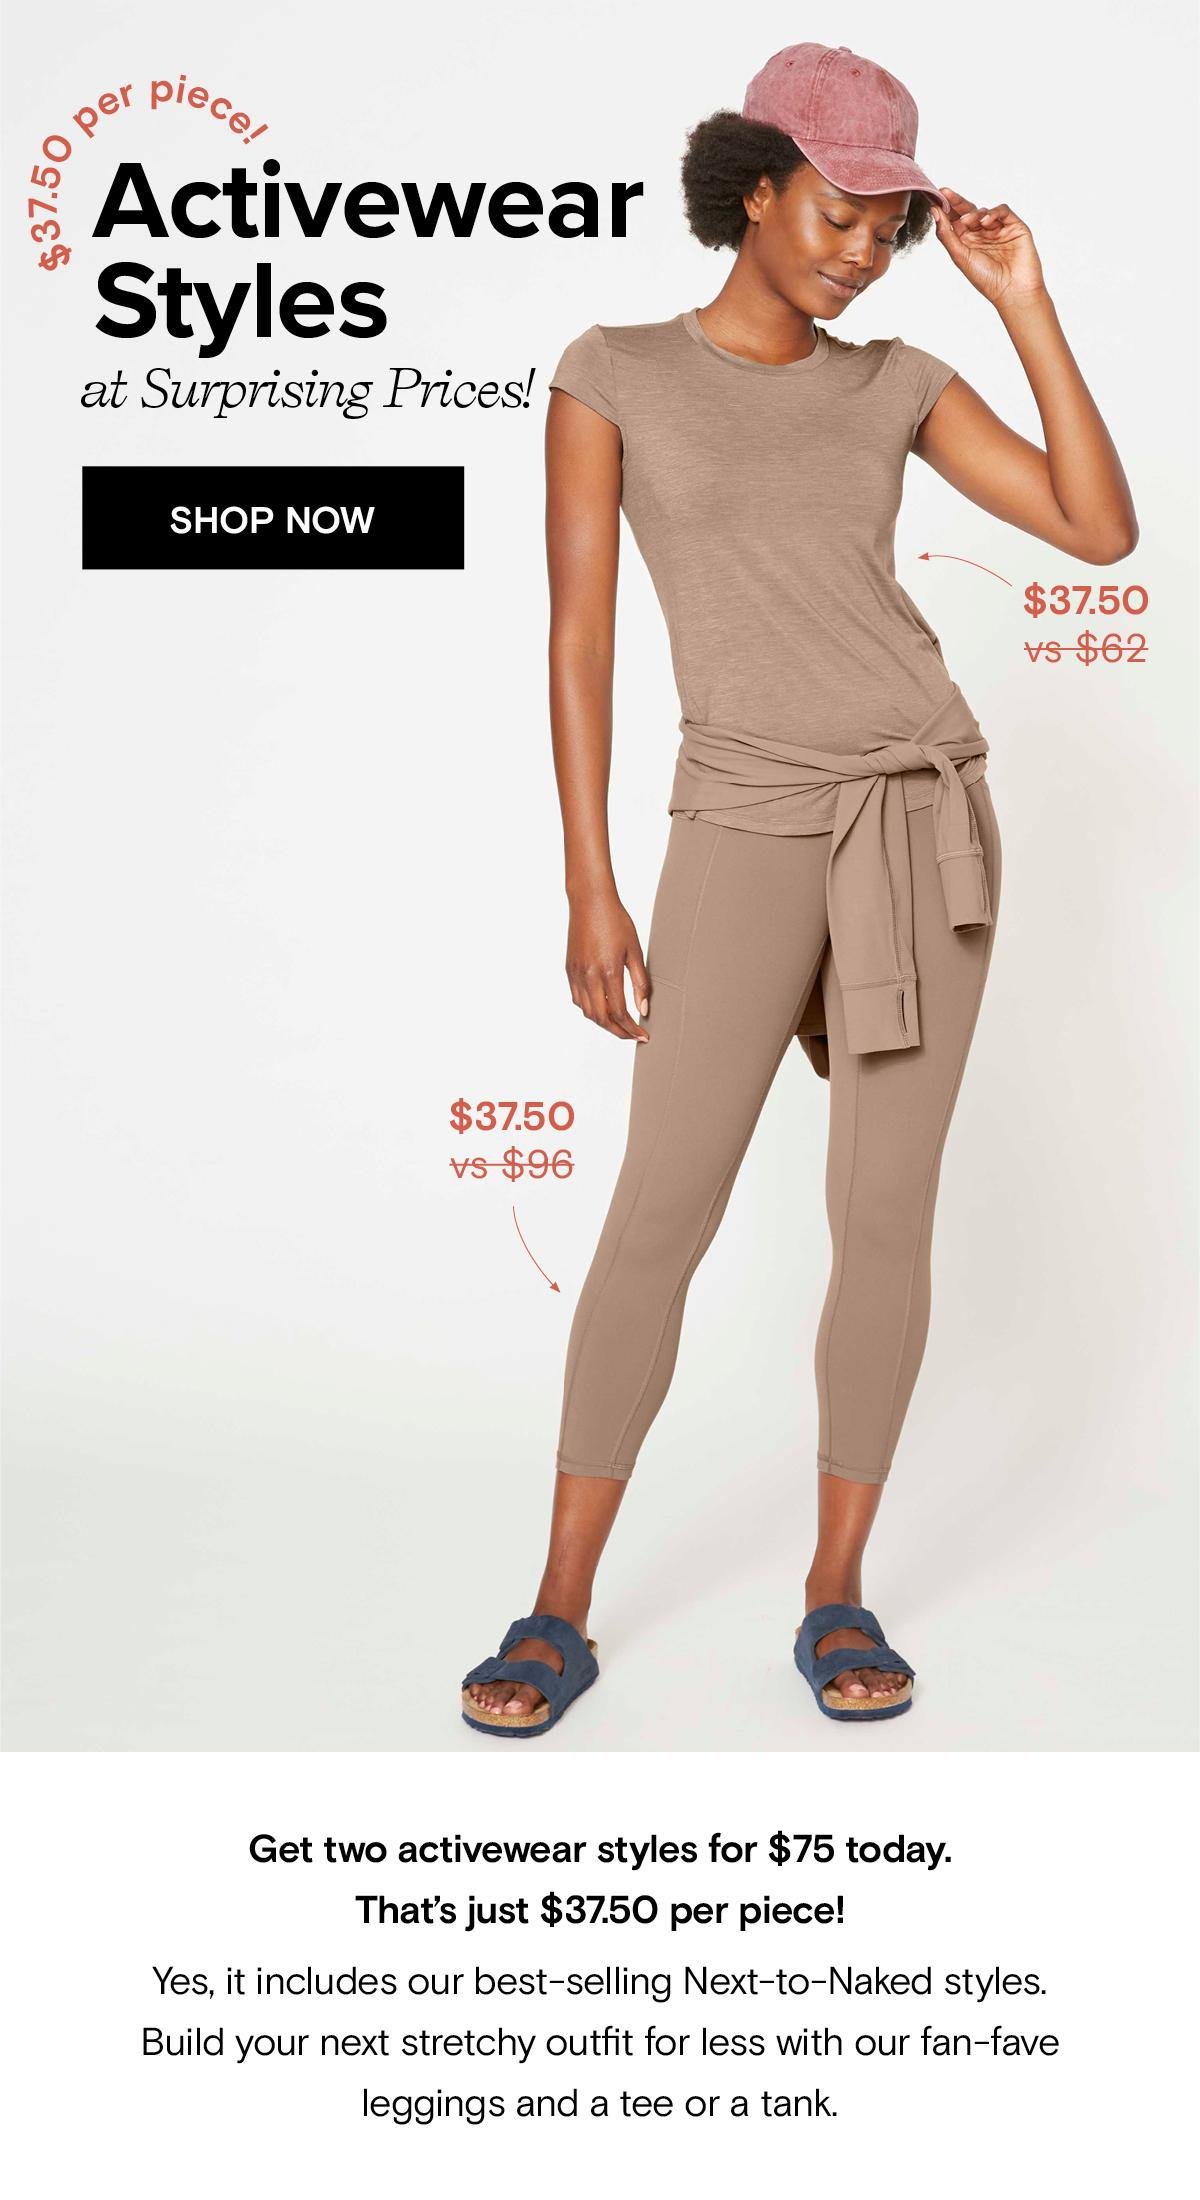 Activewear Styles at low prices!